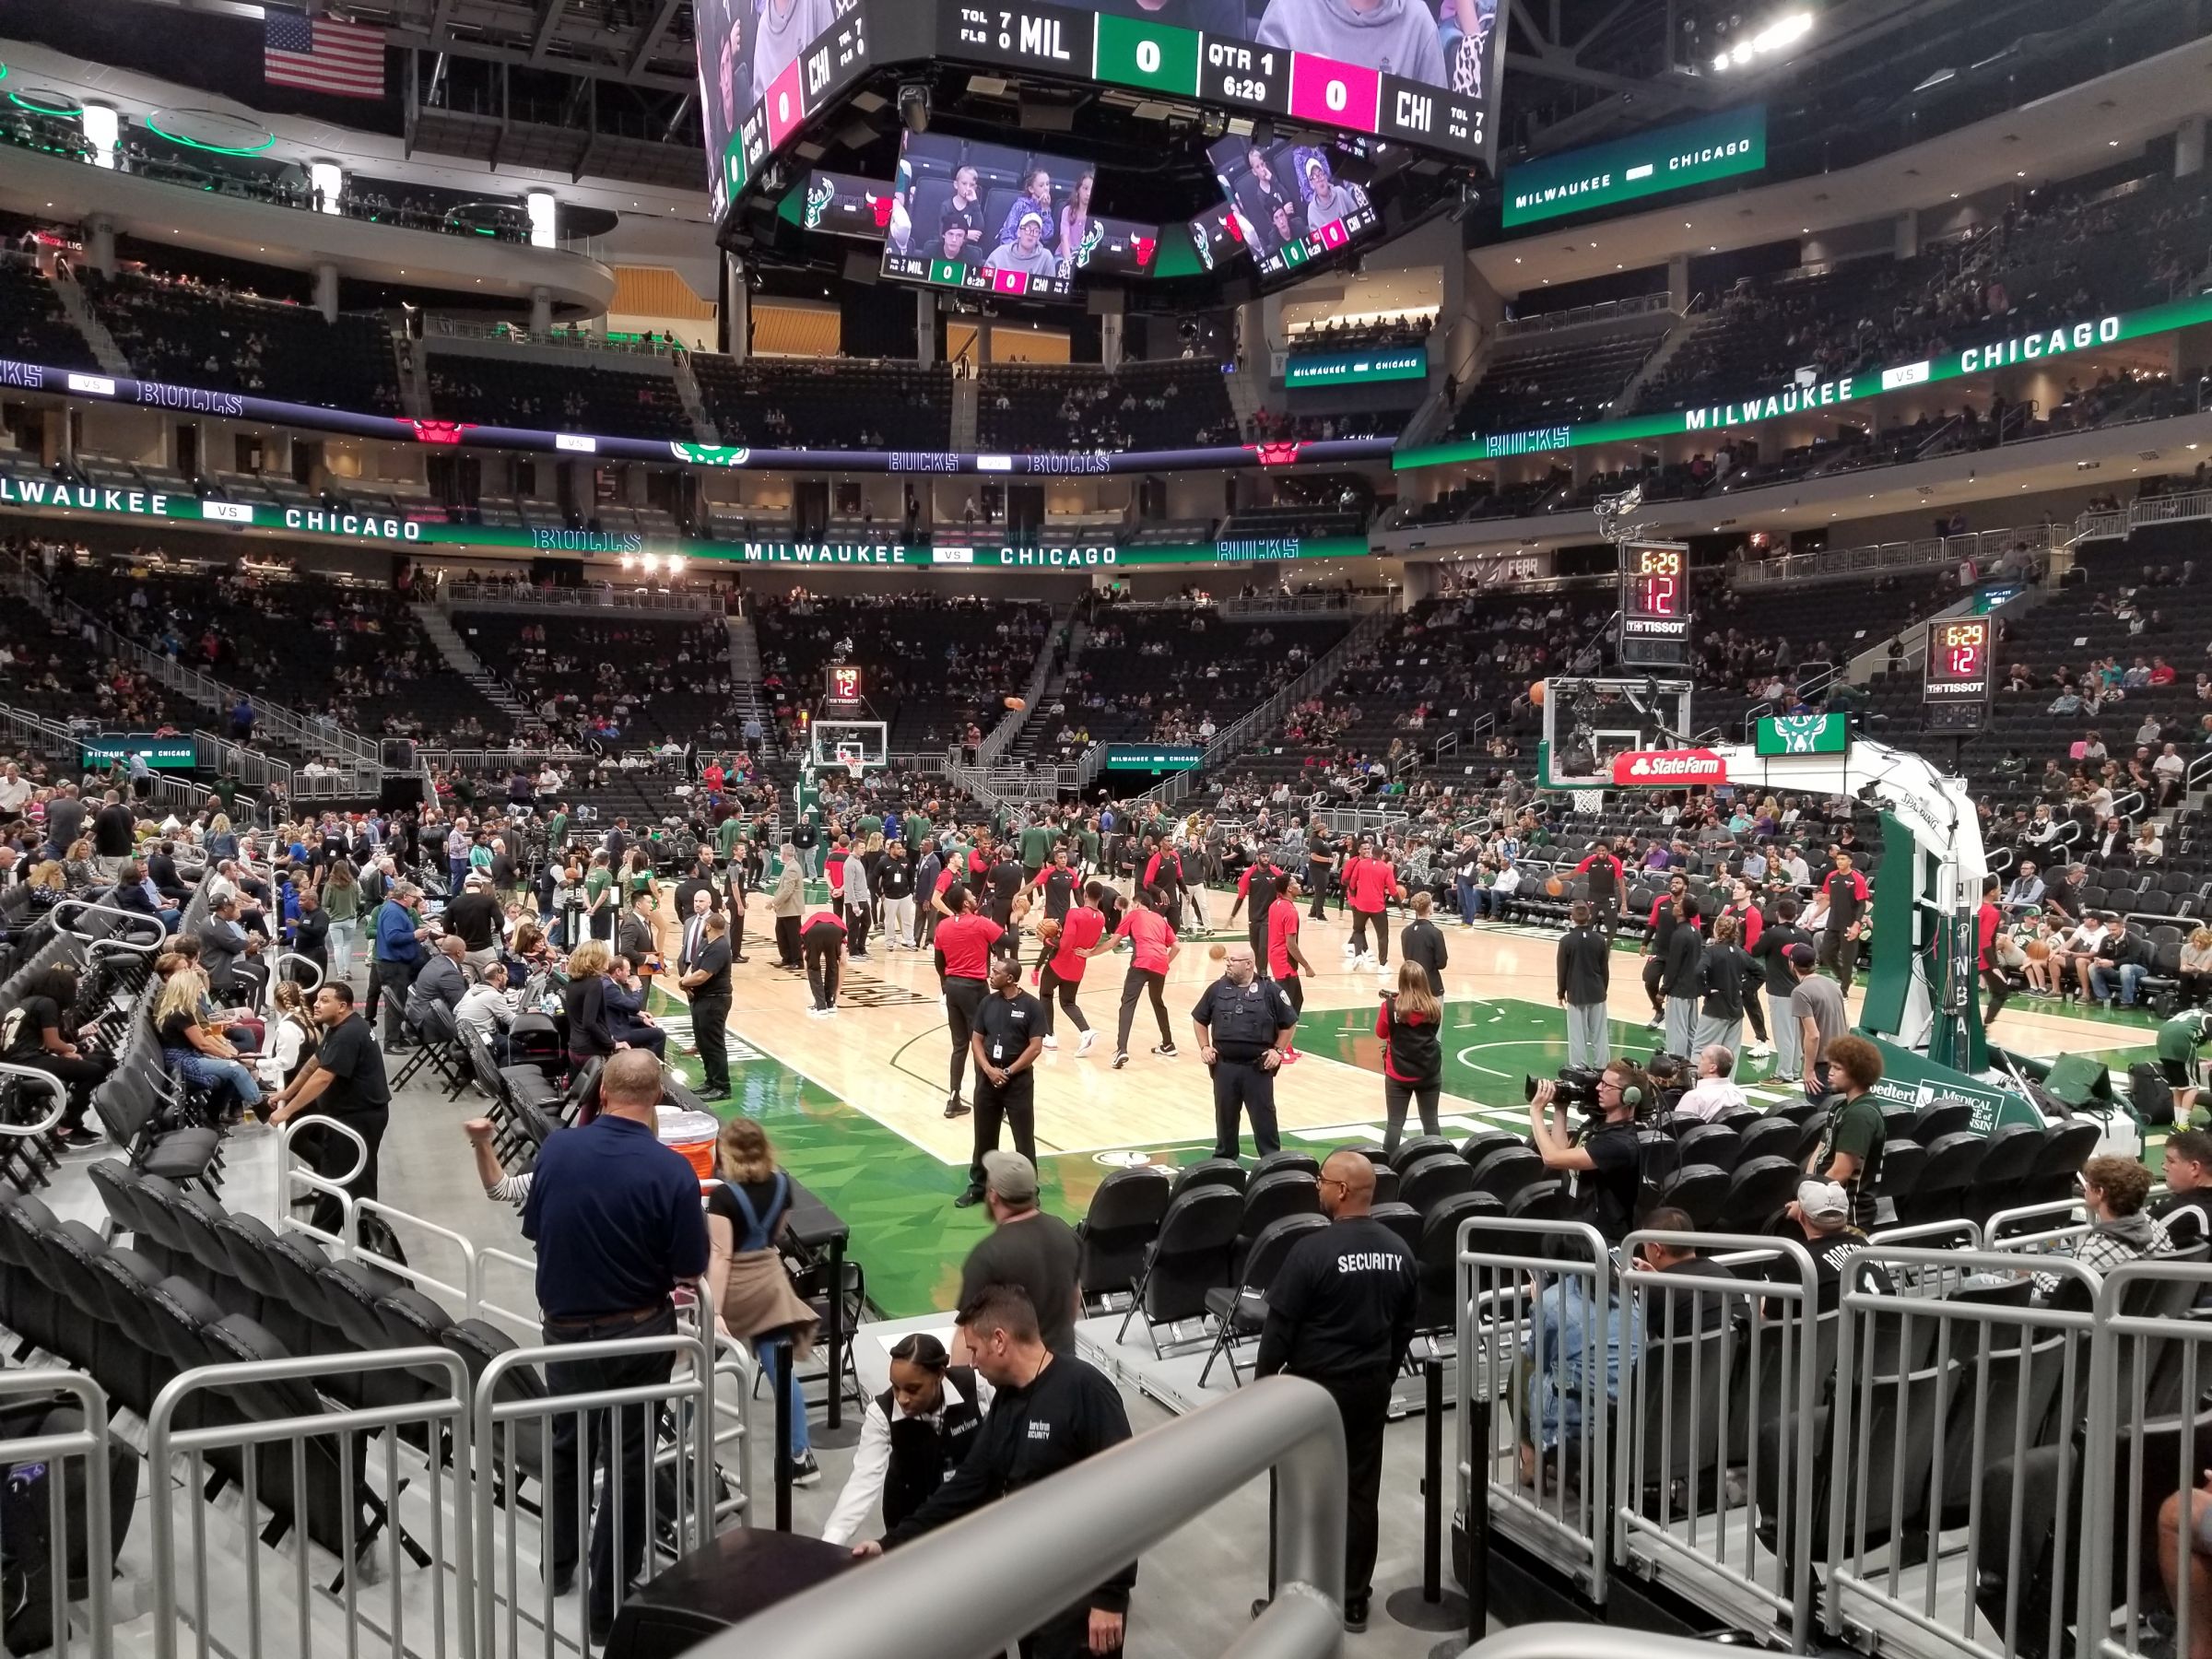 section 114, row 6 seat view  for basketball - fiserv forum